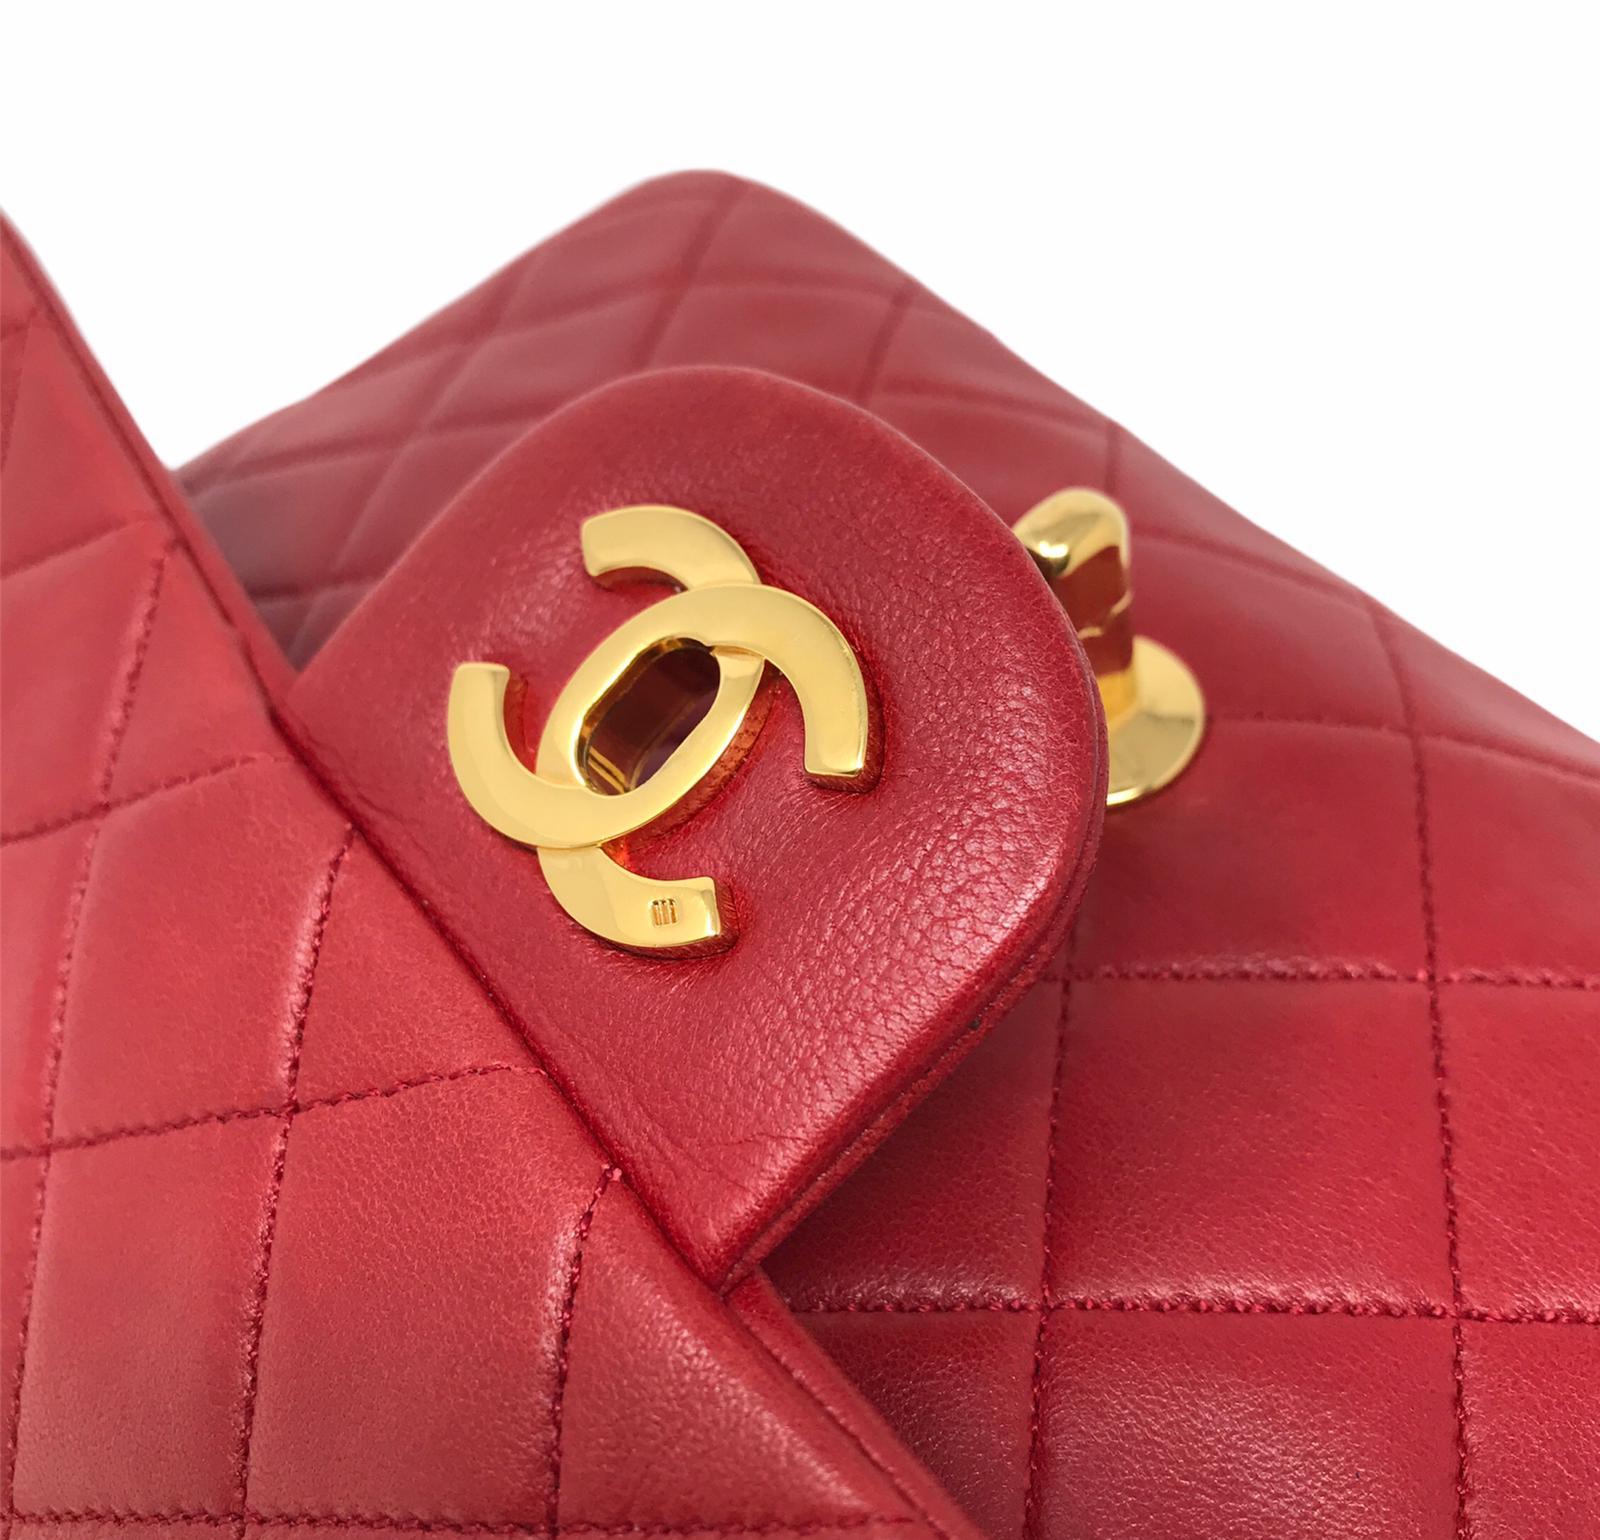 CHANEL Timeless Leather Bag For Sale 3